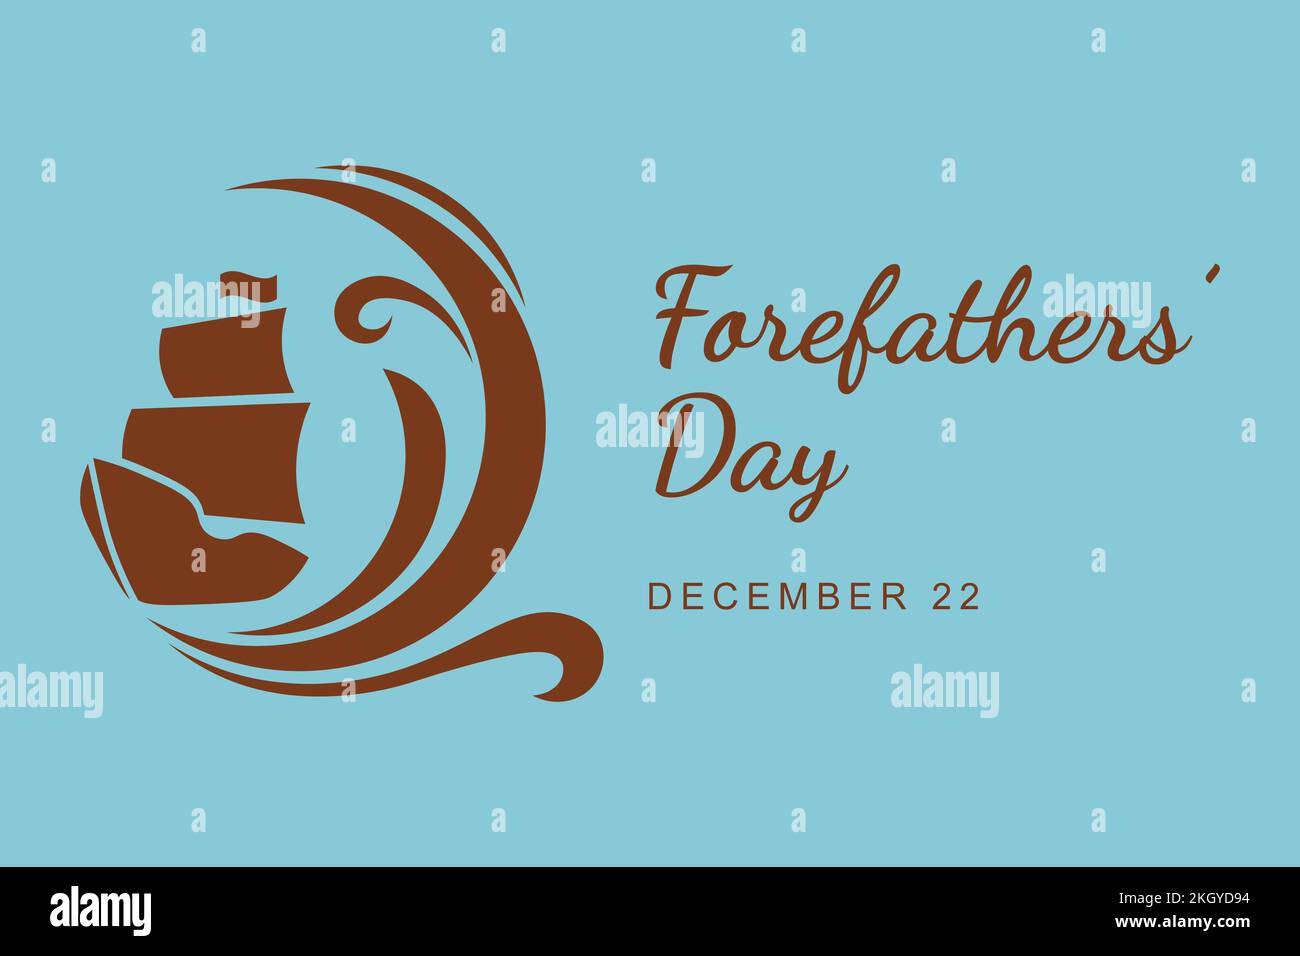 Forefathers Day background. Design with ship. Vector design illustration. Stock Photo